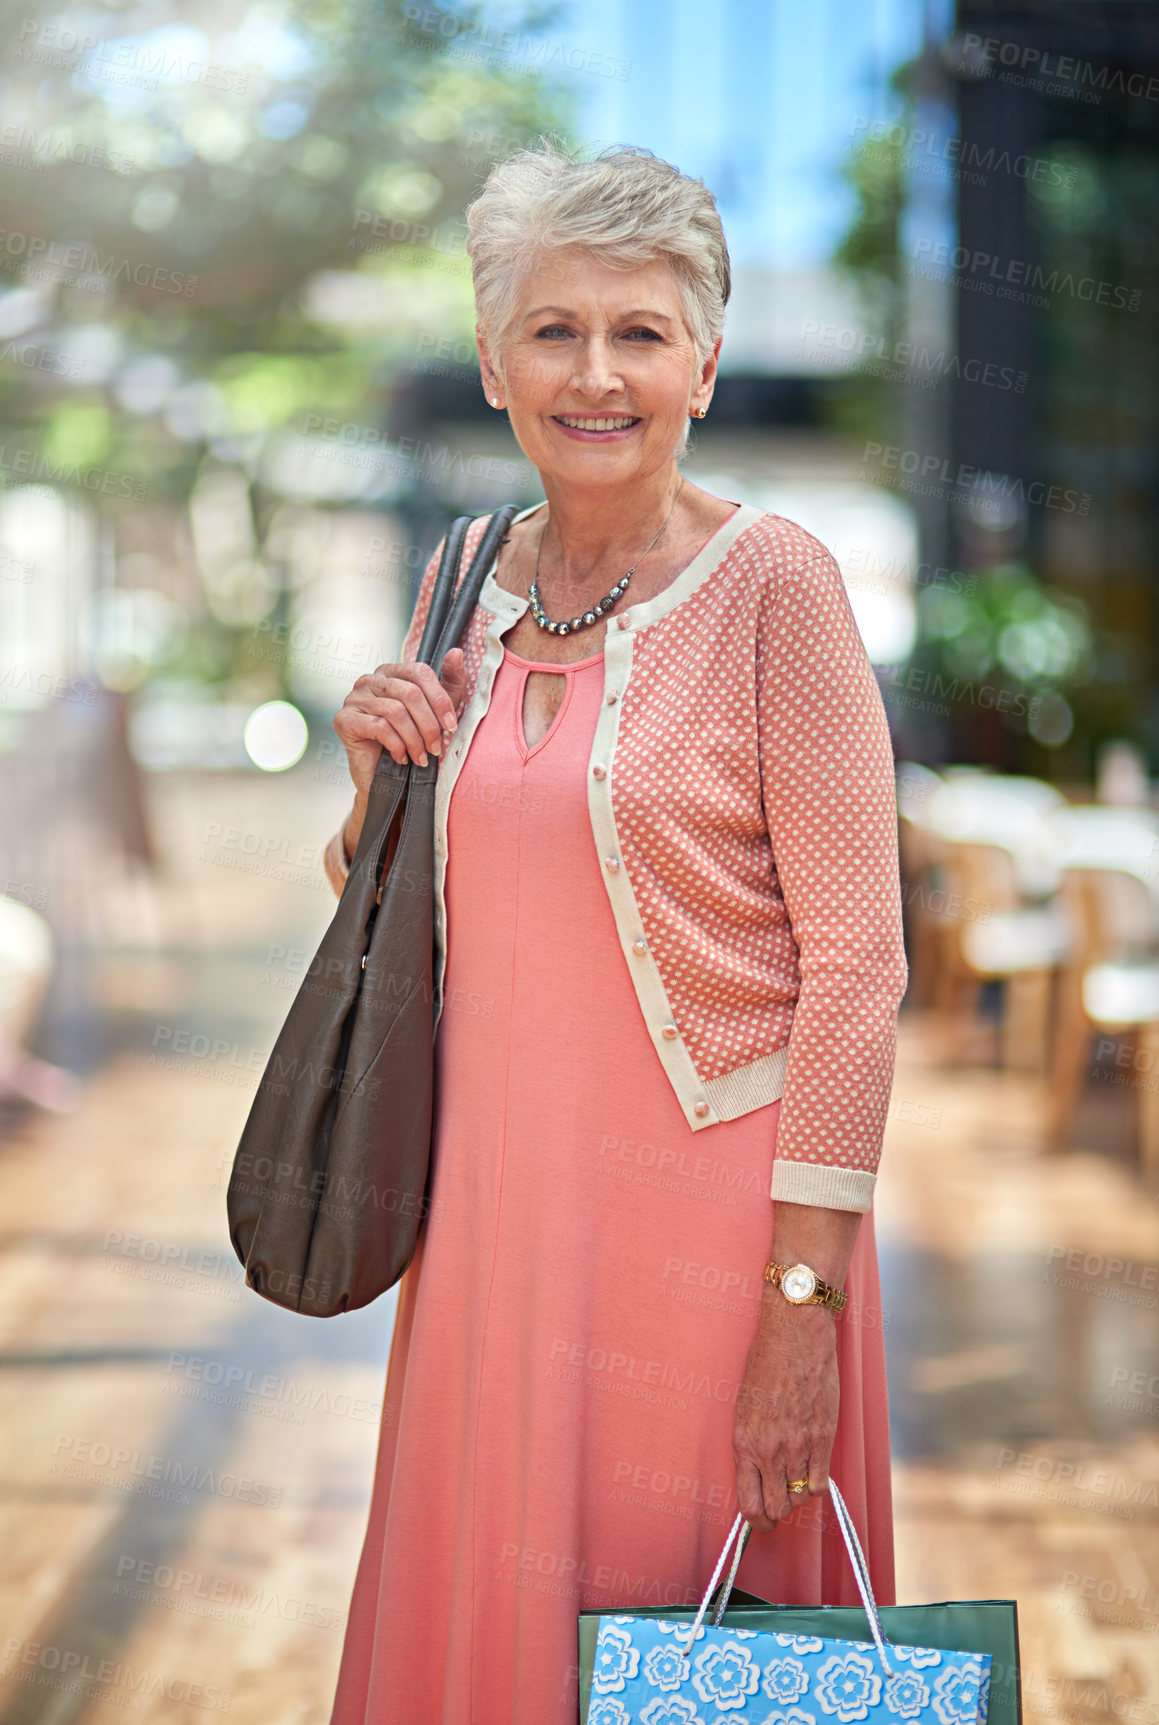 Buy stock photo Cropped portrait of a senior woman out on a shopping spree